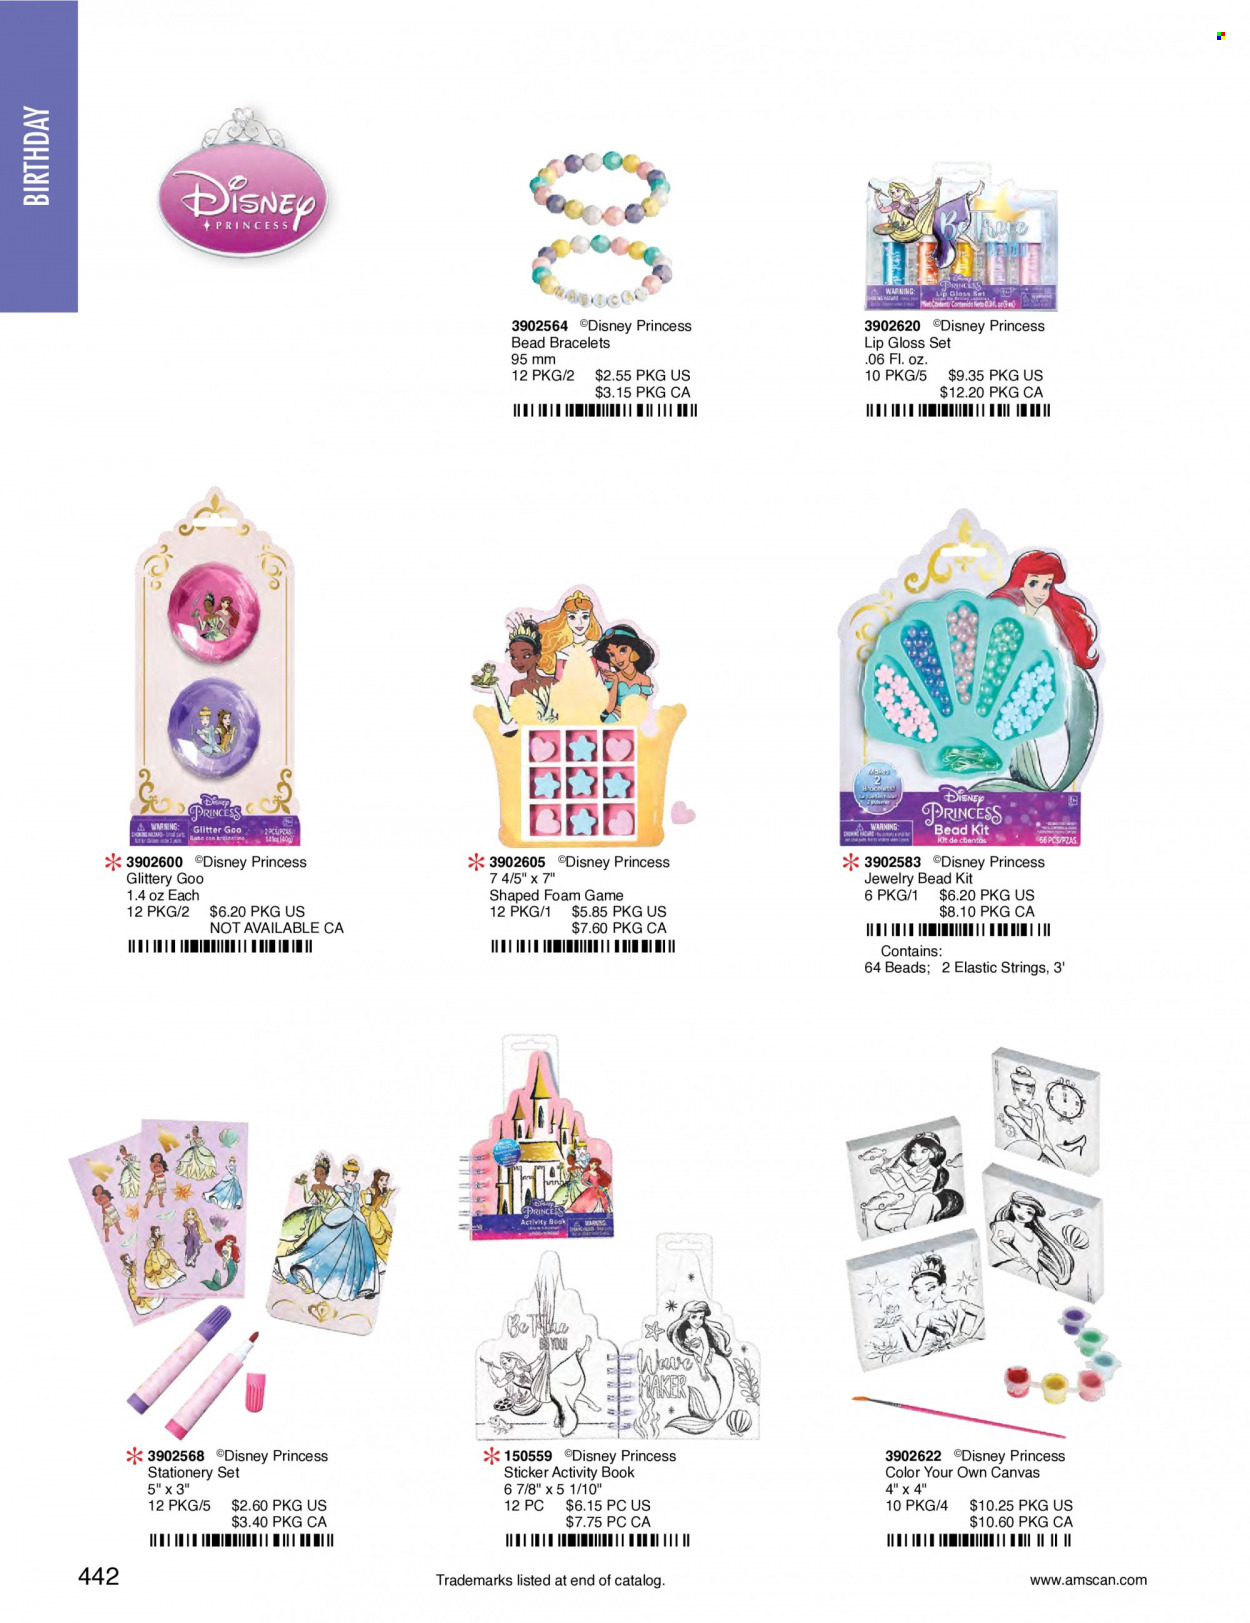 thumbnail - Amscan Flyer - Sales products - Disney, glitter, sticker, stationery product, diary, canvas, toys, princess. Page 445.